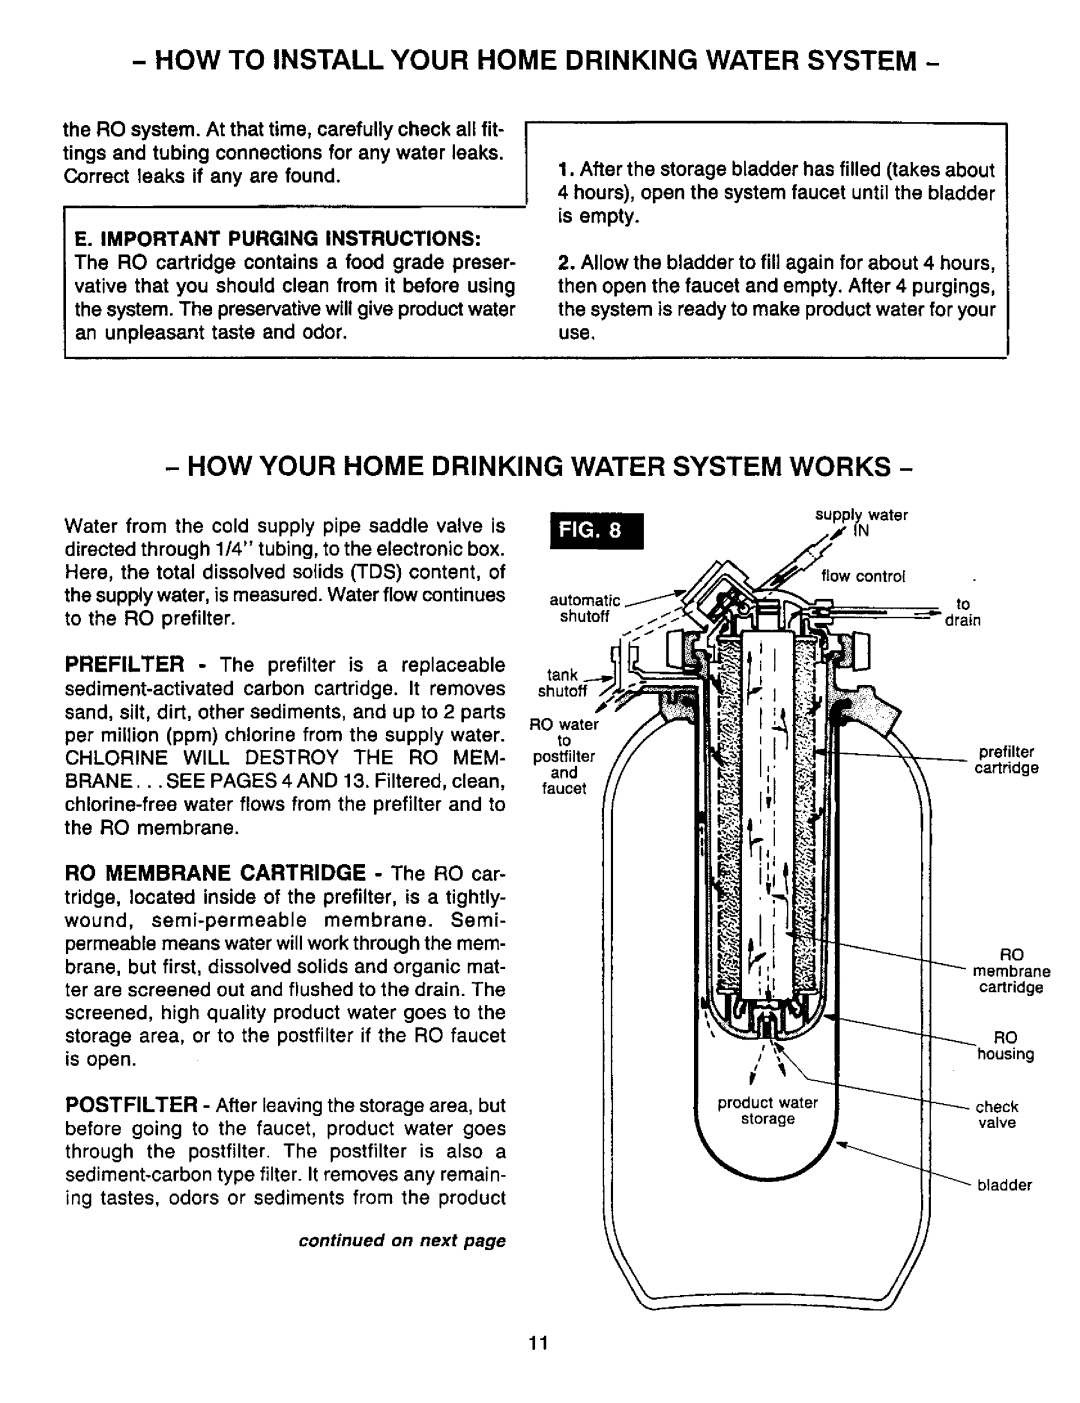 Sears RO 2000 manual How Your Home Drinking Water System Works, E. Important Purging Instructions 